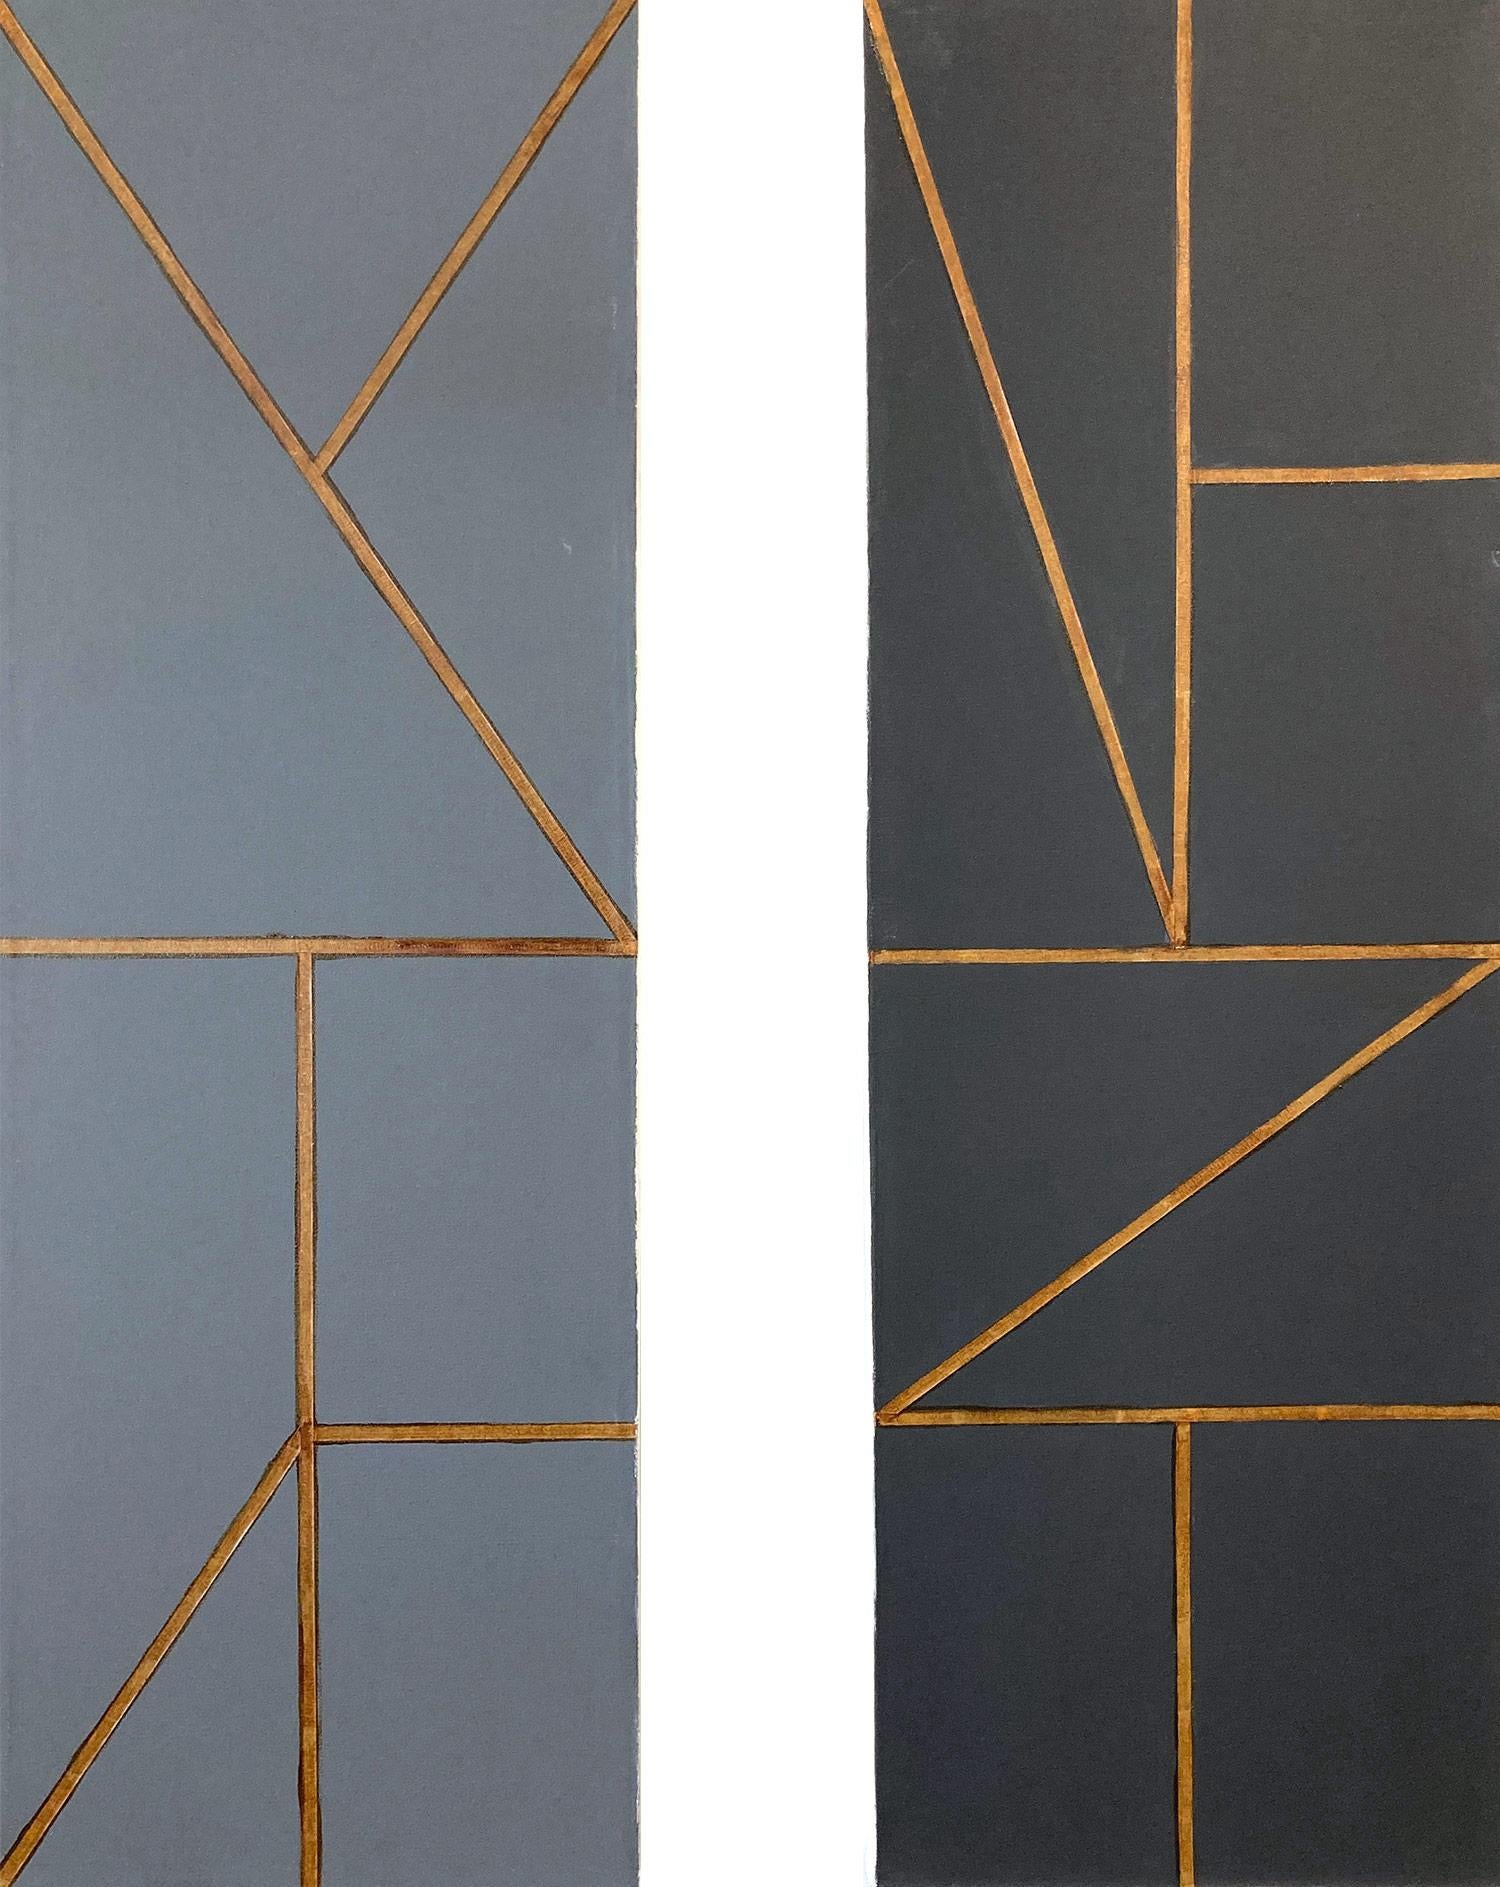 Kid Utah Abstract Painting - "Radio City Music Hall" Art Deco Geometric Painting on Canvas with Gold Diptych